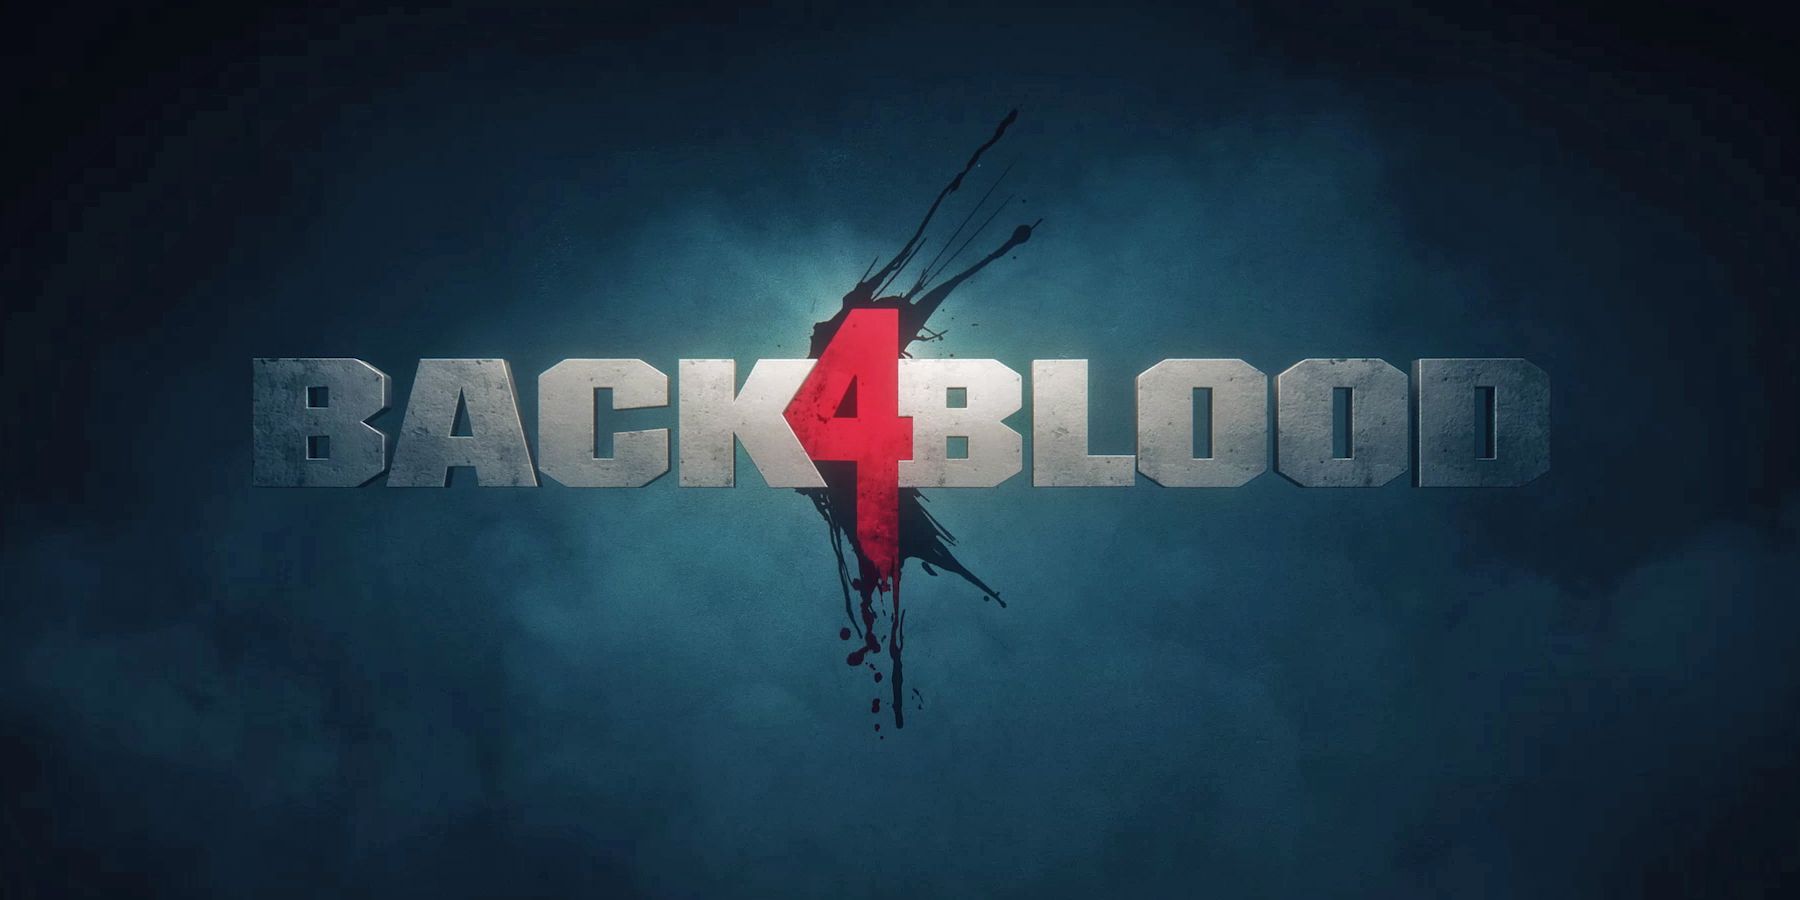 The text logo for Back 4 Blood.